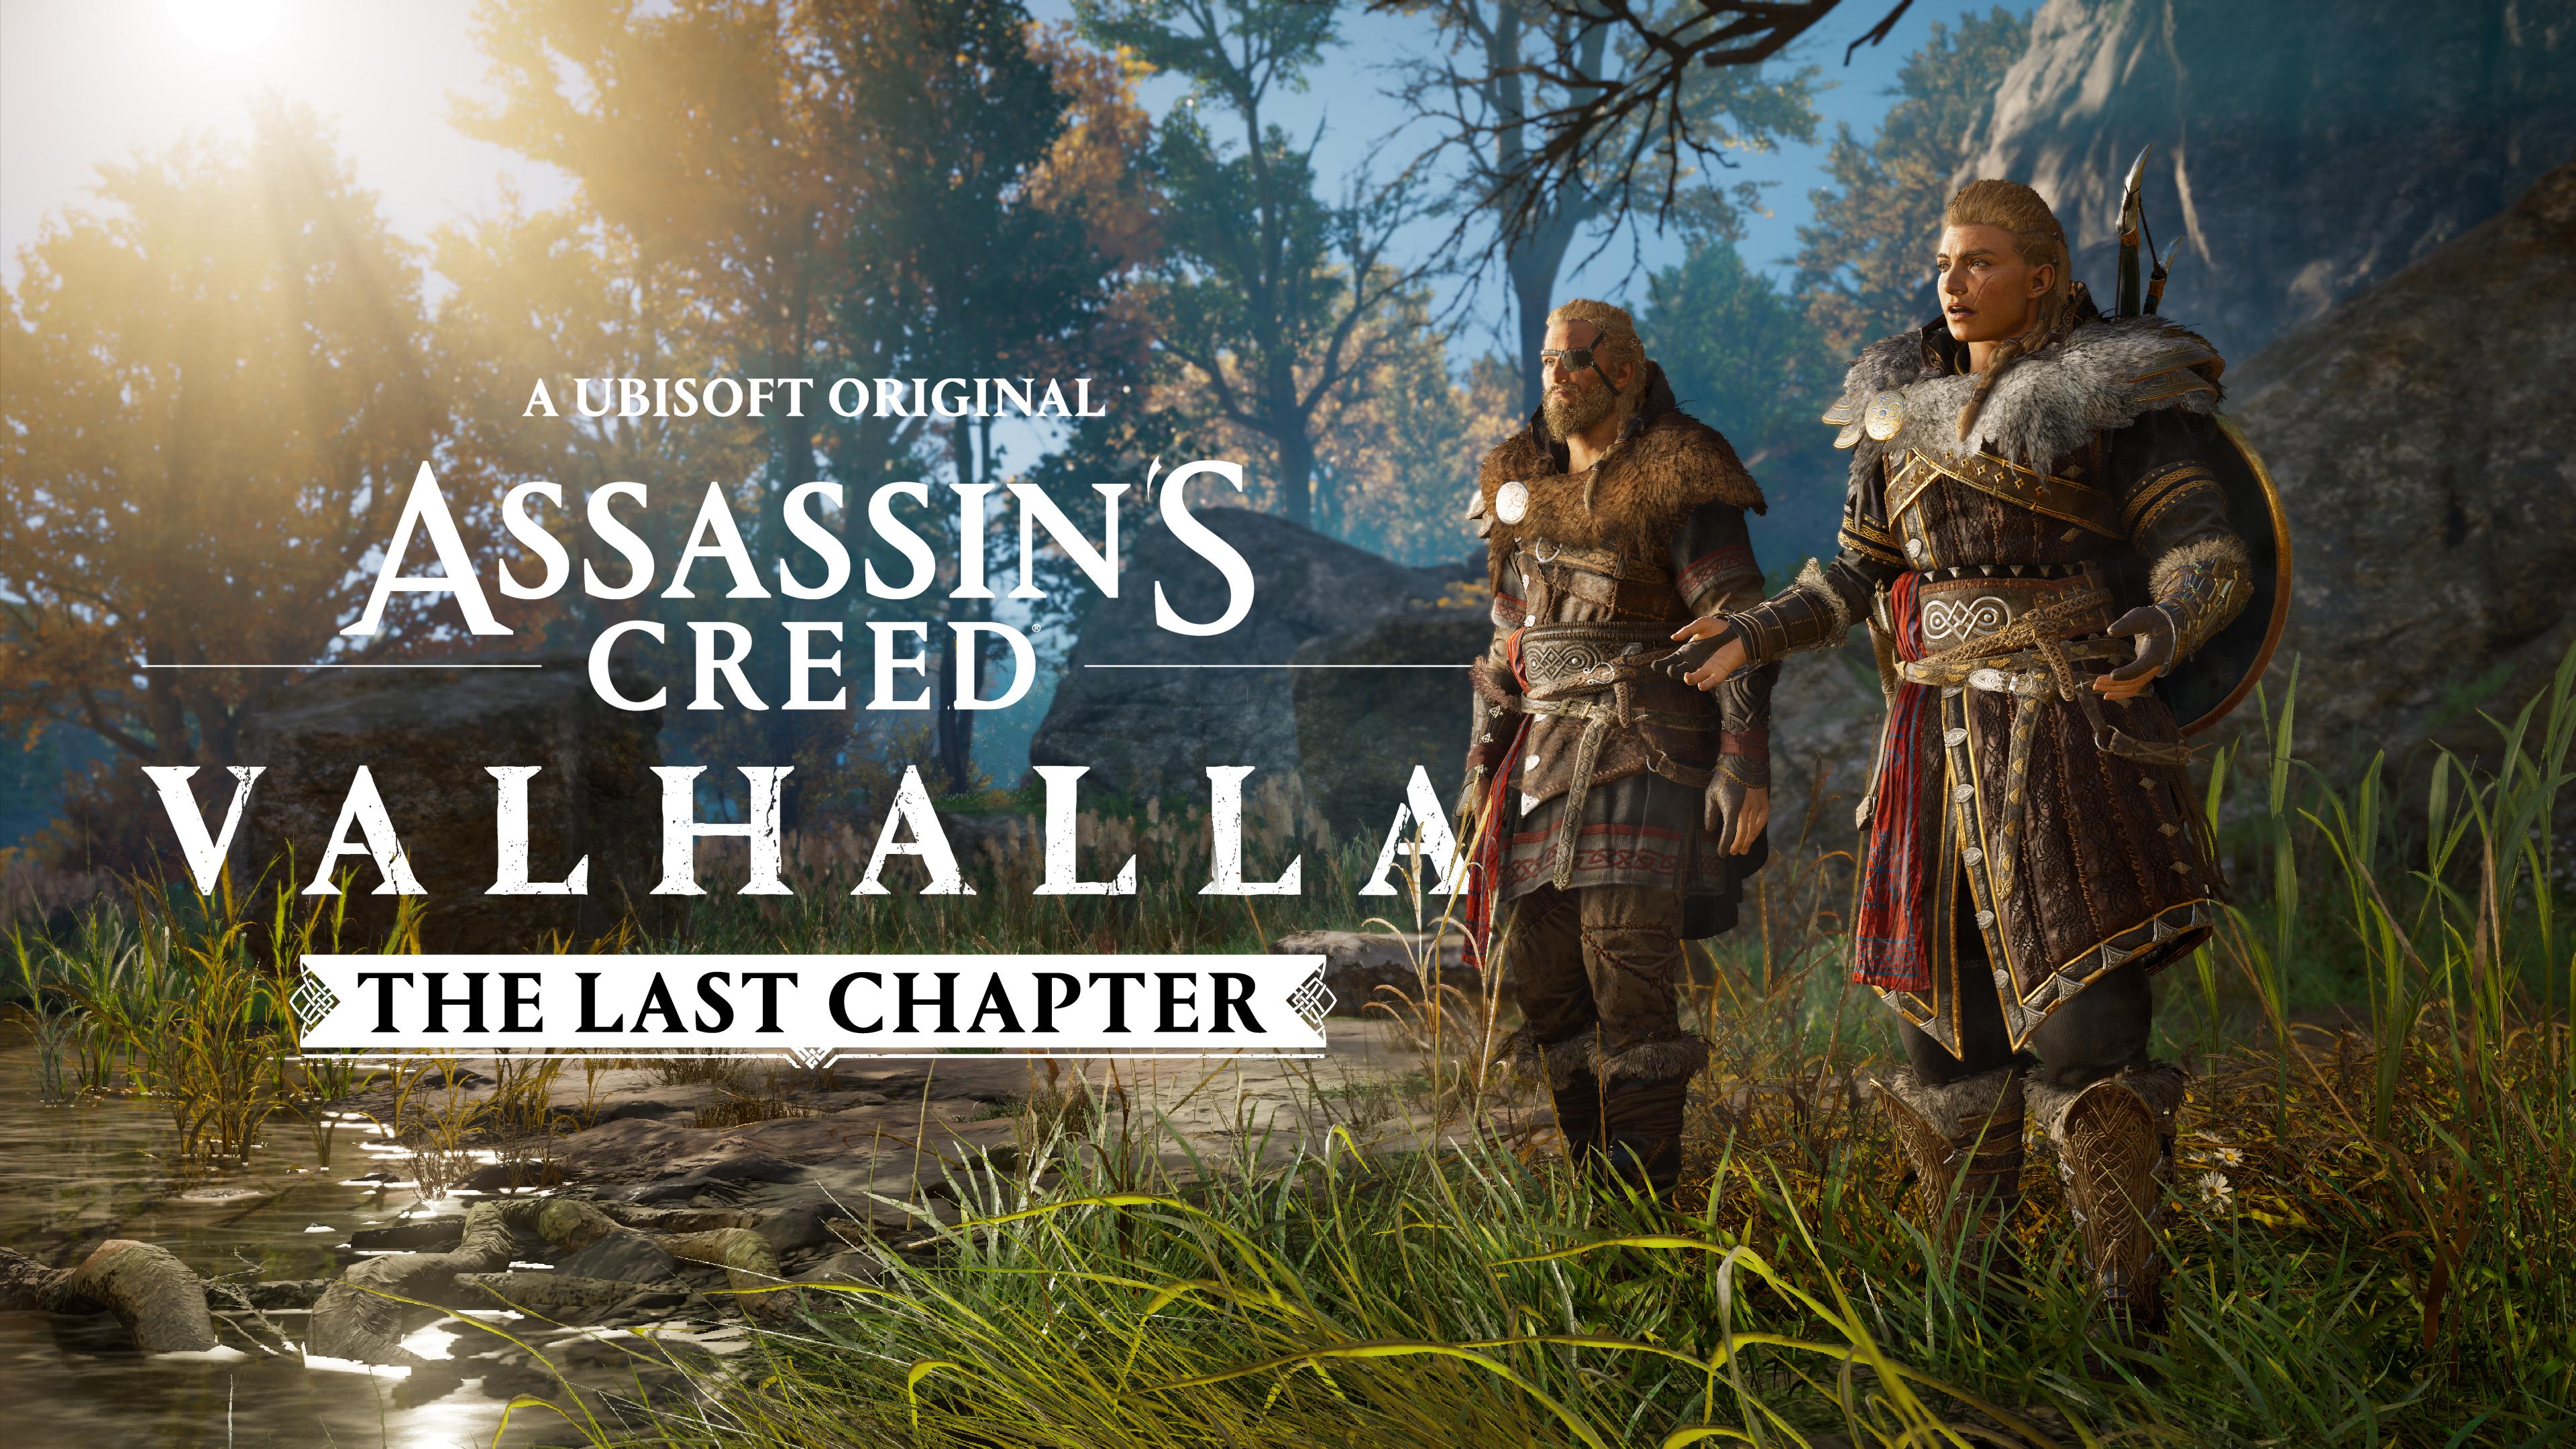 Assassin's Creed Valhalla: The Final Chapter.